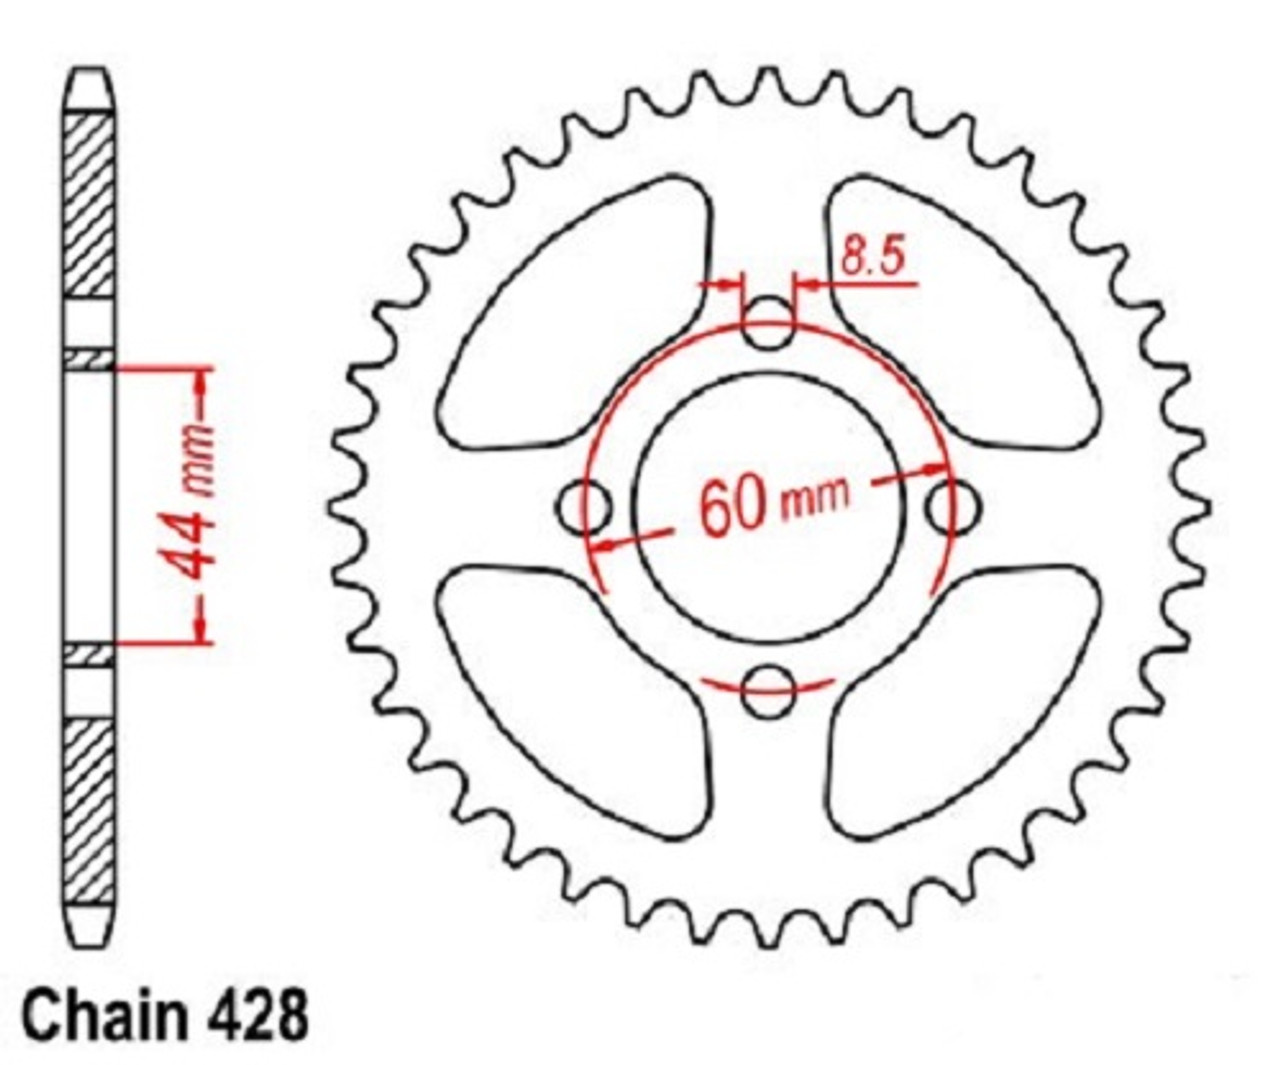 Coolster 428 Kayo Bull Storm 180 rear sprocket for 110cc and 125cc ATV - 60mm mounting diameter